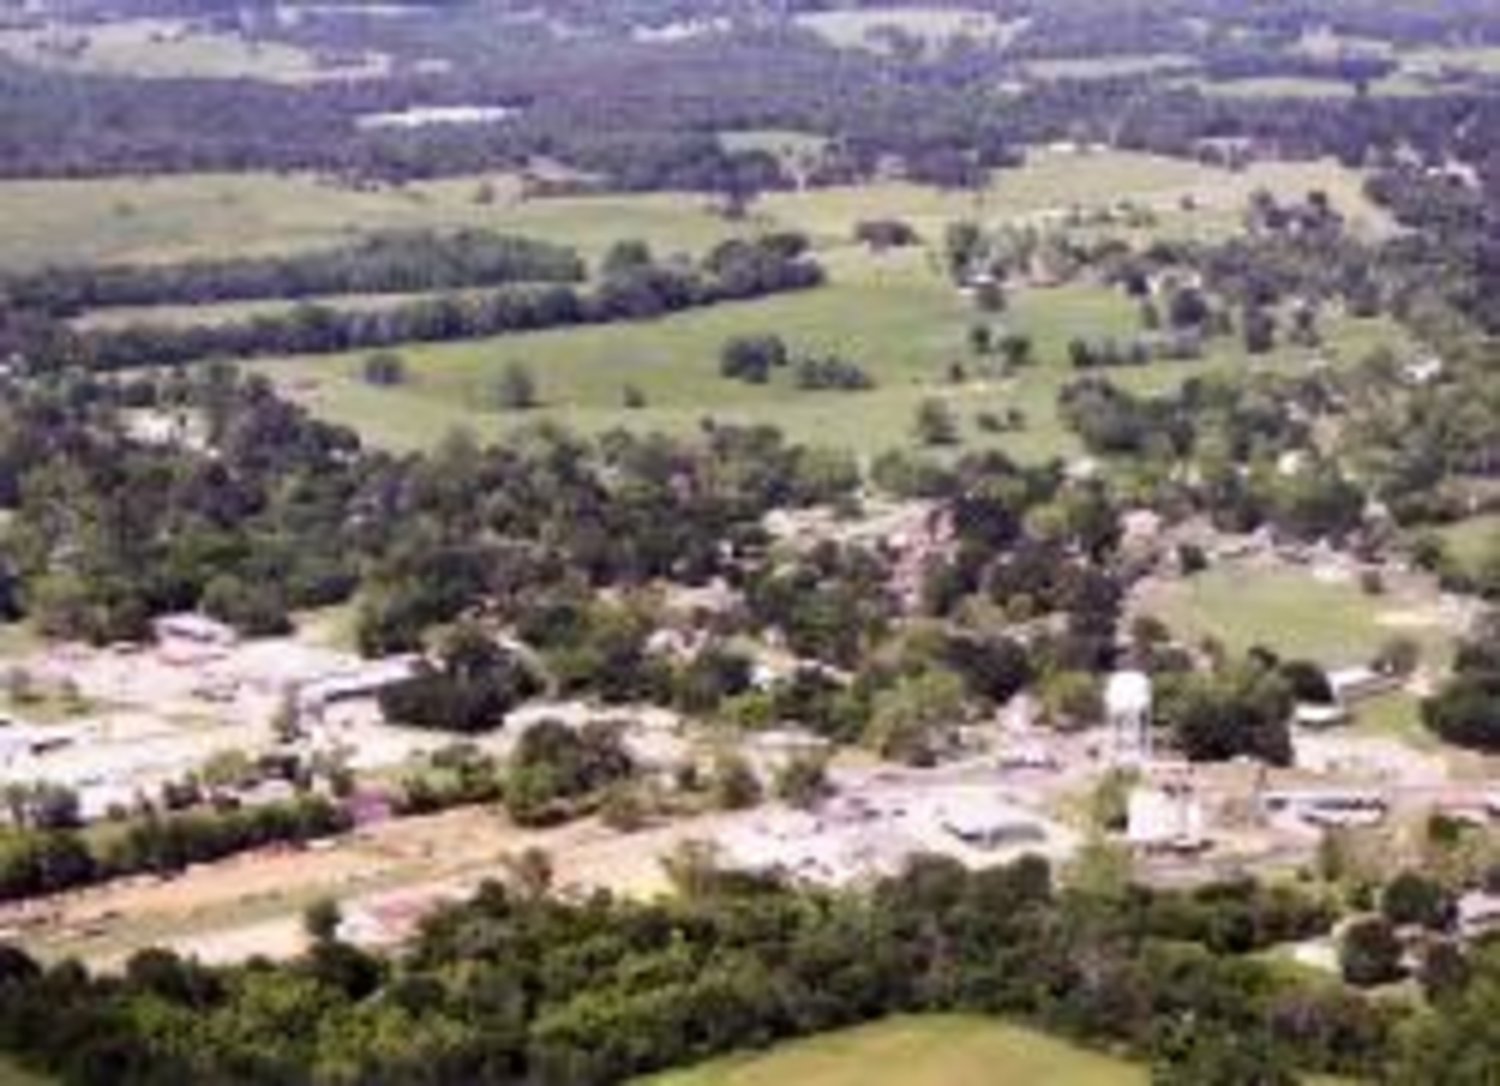 A view of Winnsboro from the Flight for Life helicopter.